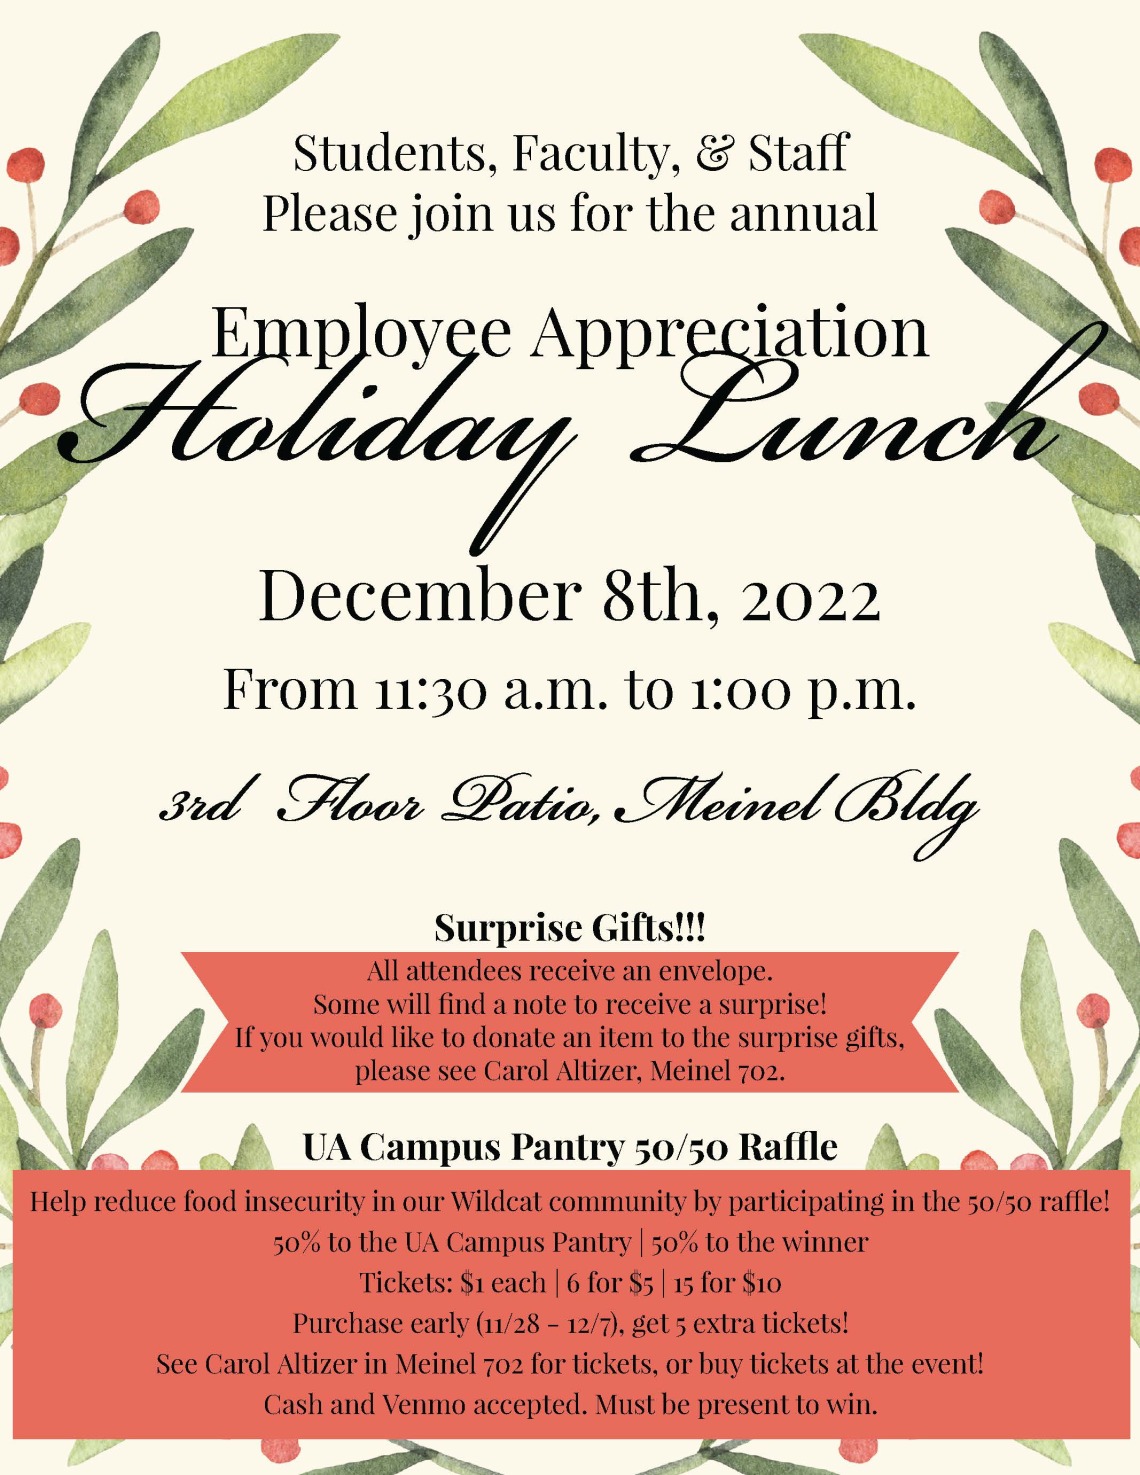 Holiday lunch updated flyer